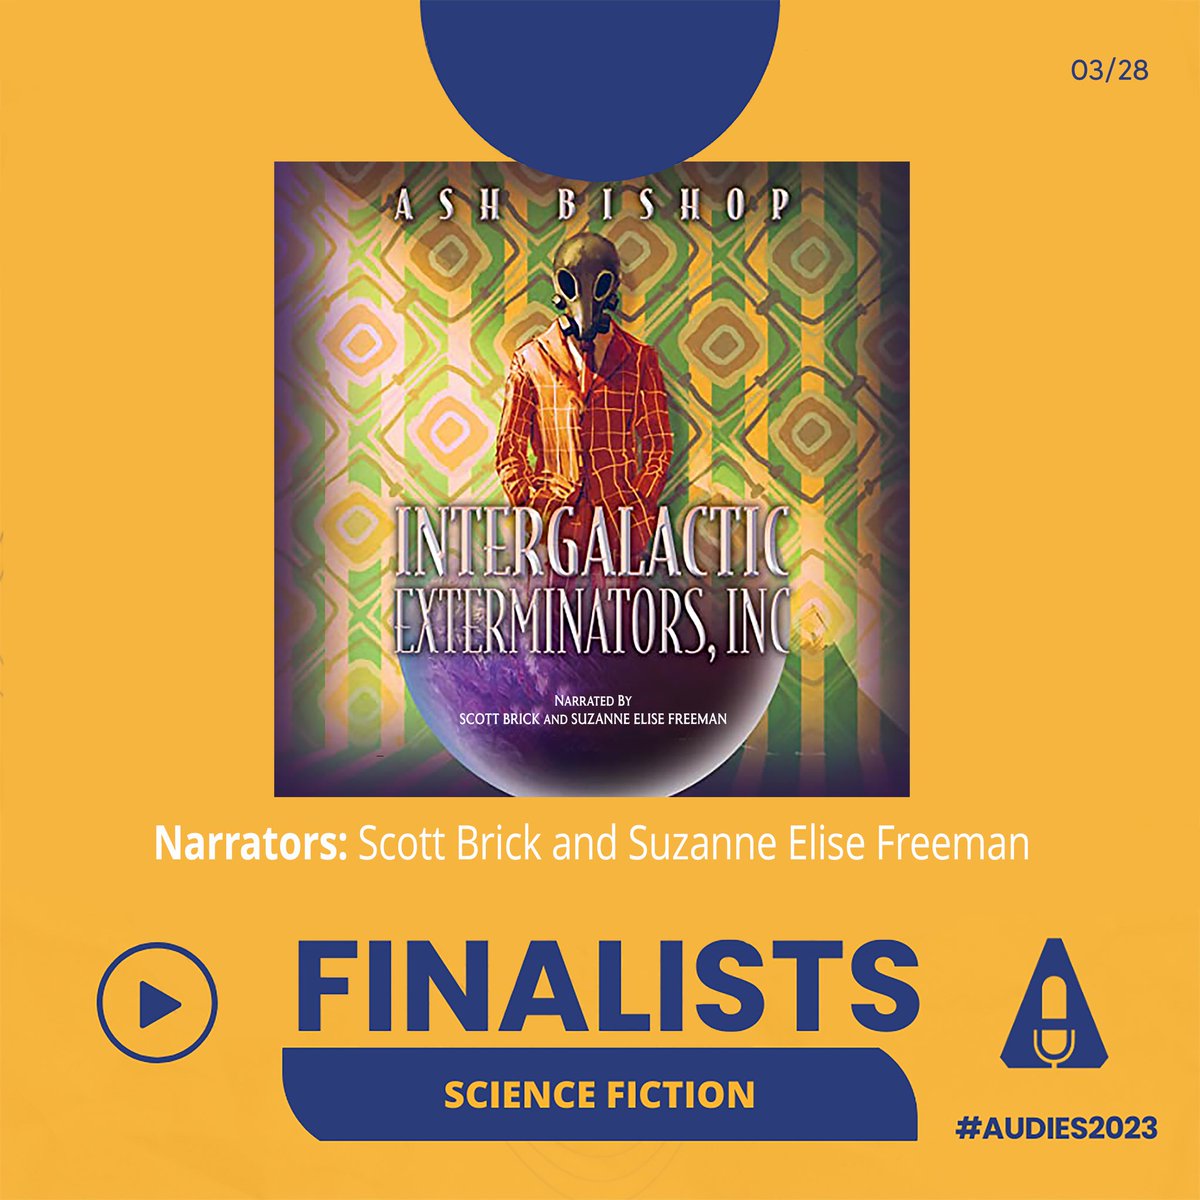 And here it is… my #audies #finalist title in #sciencefiction Intergalactic Exterminators, Inc., with @ScottBrick (also my fiancé… cool, right?!).  Thanks to @mosaicaudio, @CamCatBooks & @AshLBishop for letting me help narrate this super fun book! #Audies2023 #audiobooks #scifi